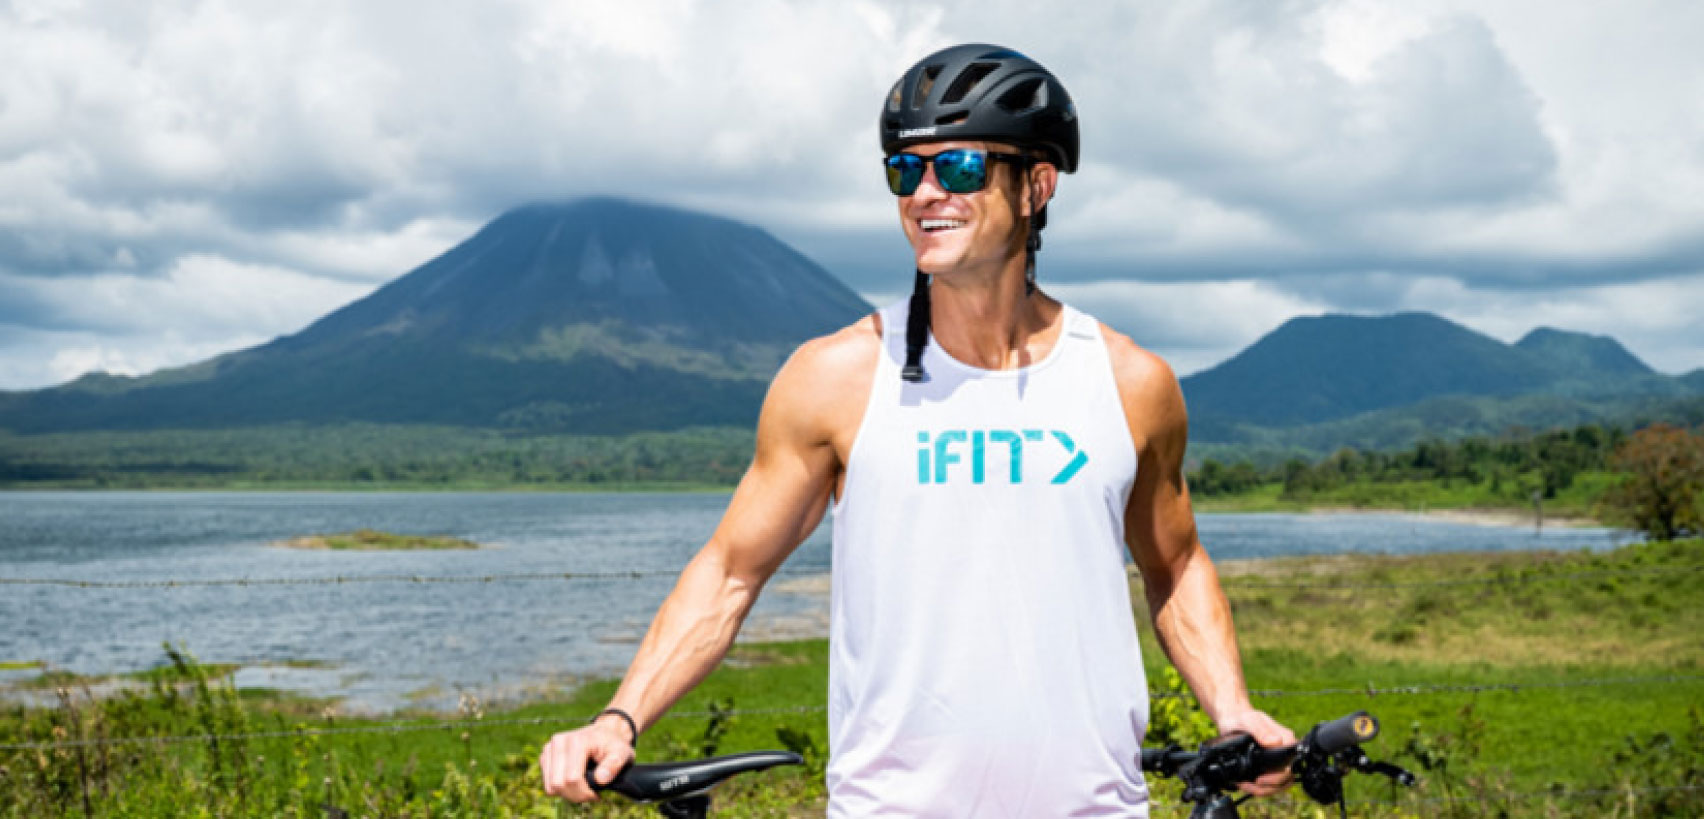 iFIT Costa Rica Beginner cycling workout series